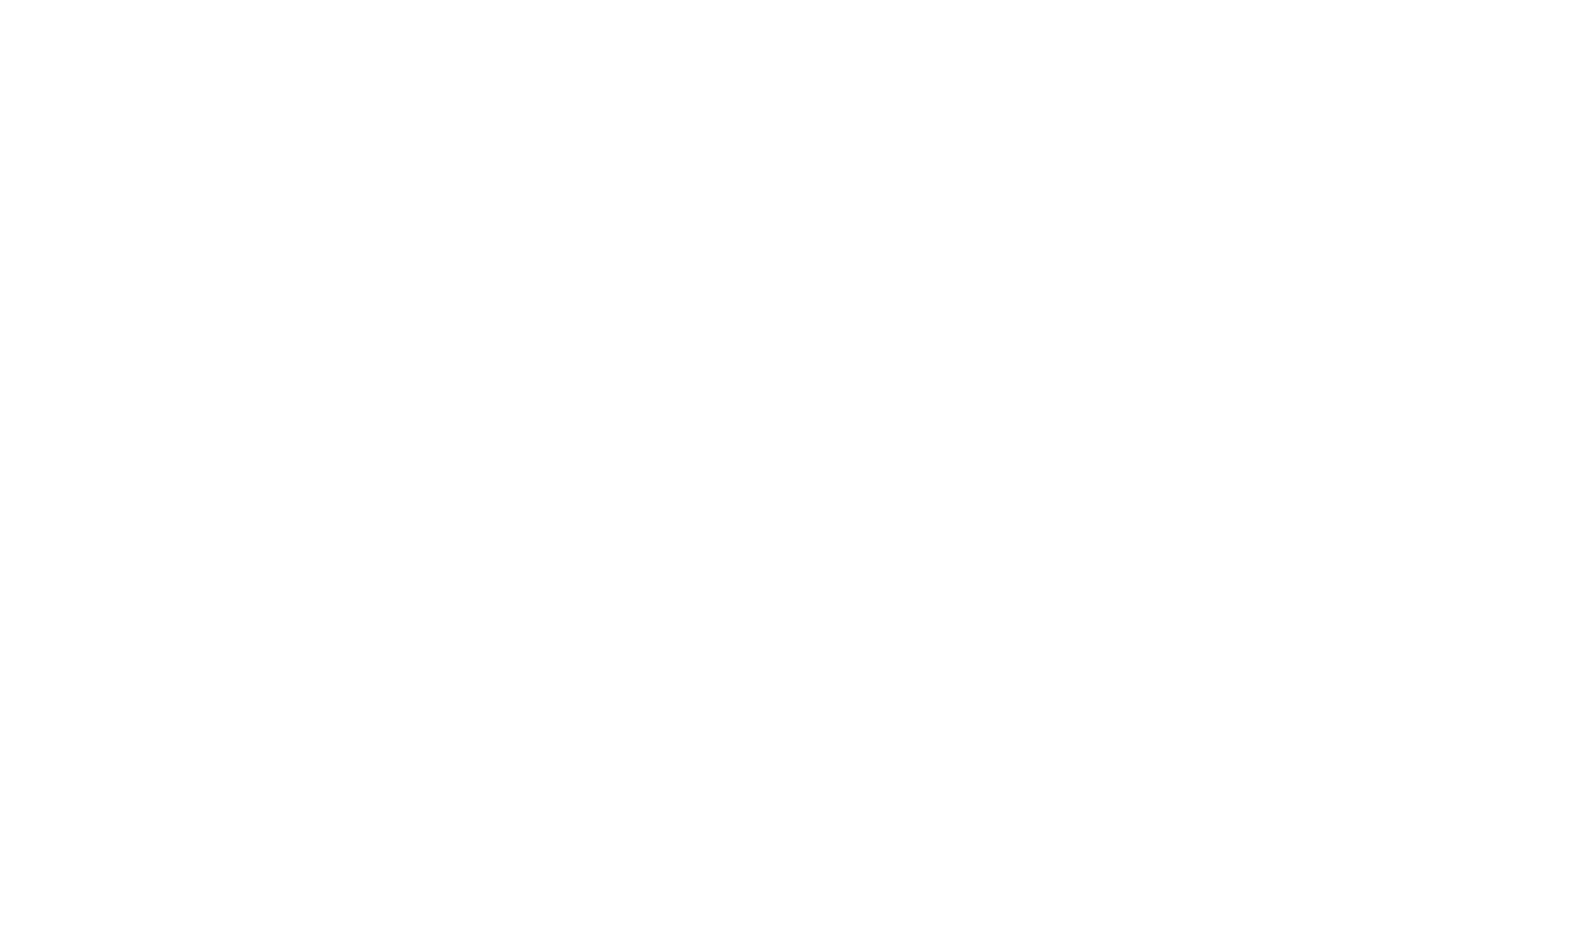 IAA-Insurance Auto Auctions logo large for dark backgrounds (transparent PNG)